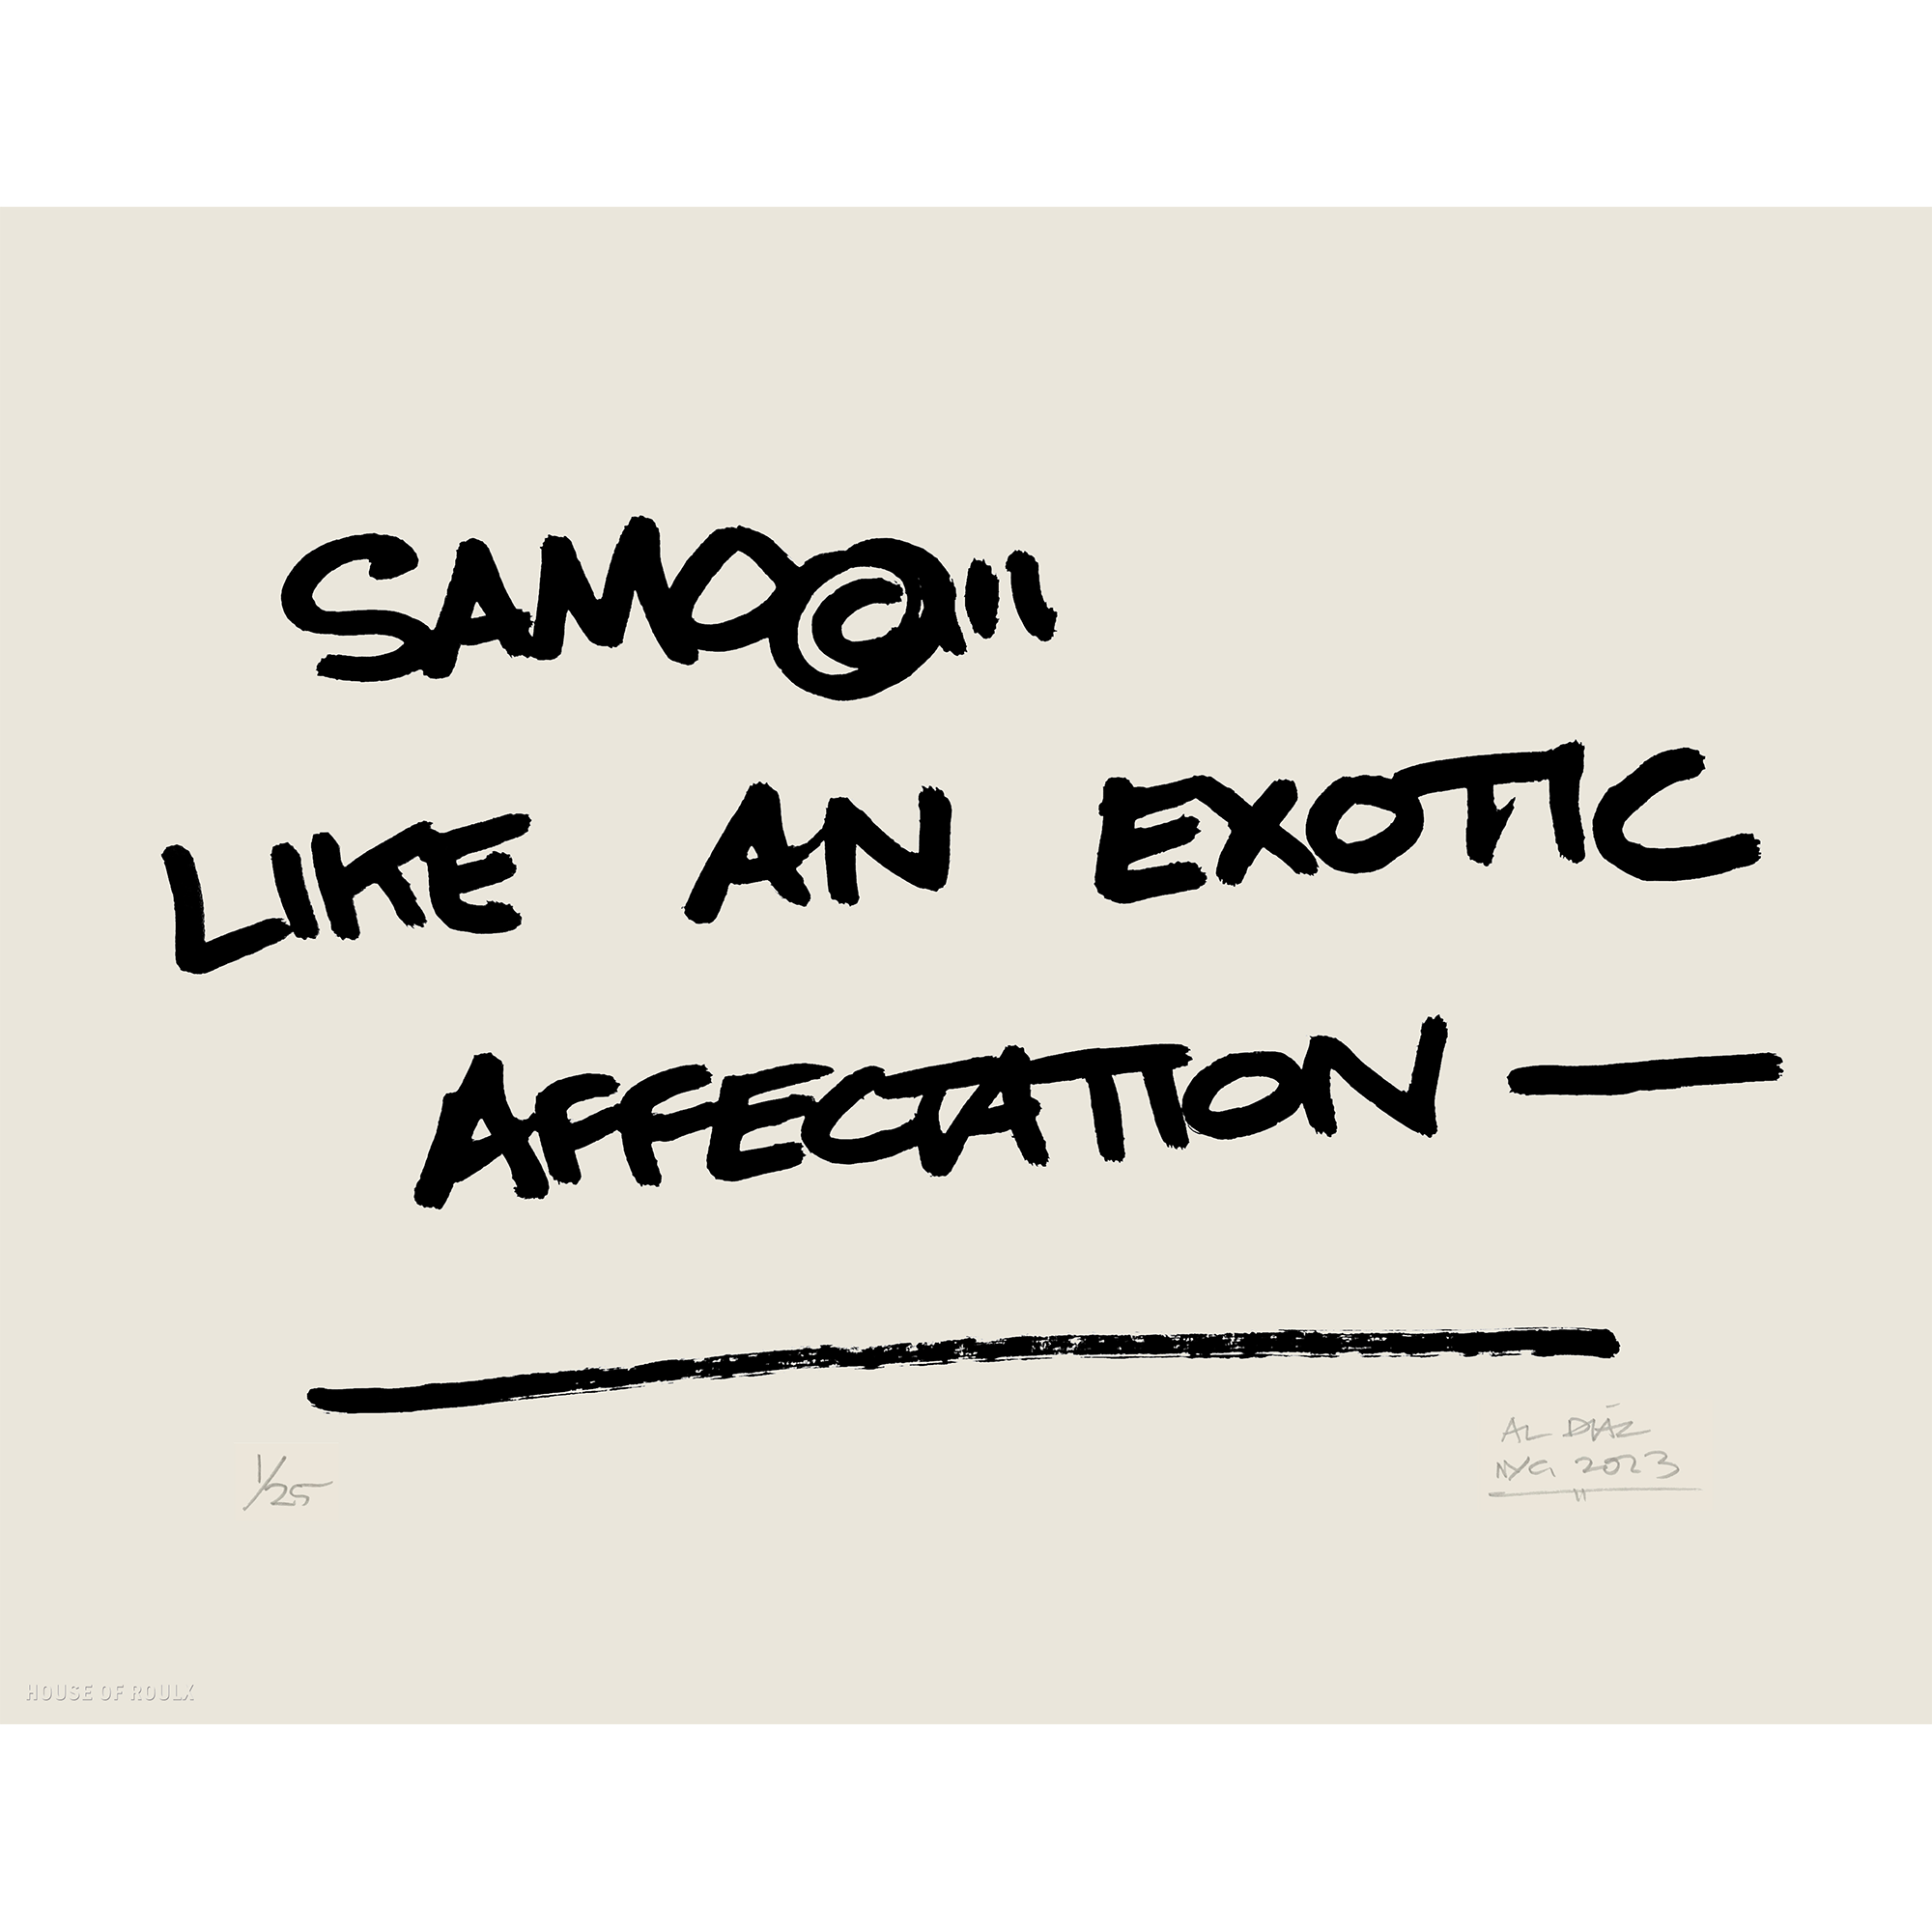 SAMO© For Those of Us Who Merely Tolerate Civilization – Al Diaz